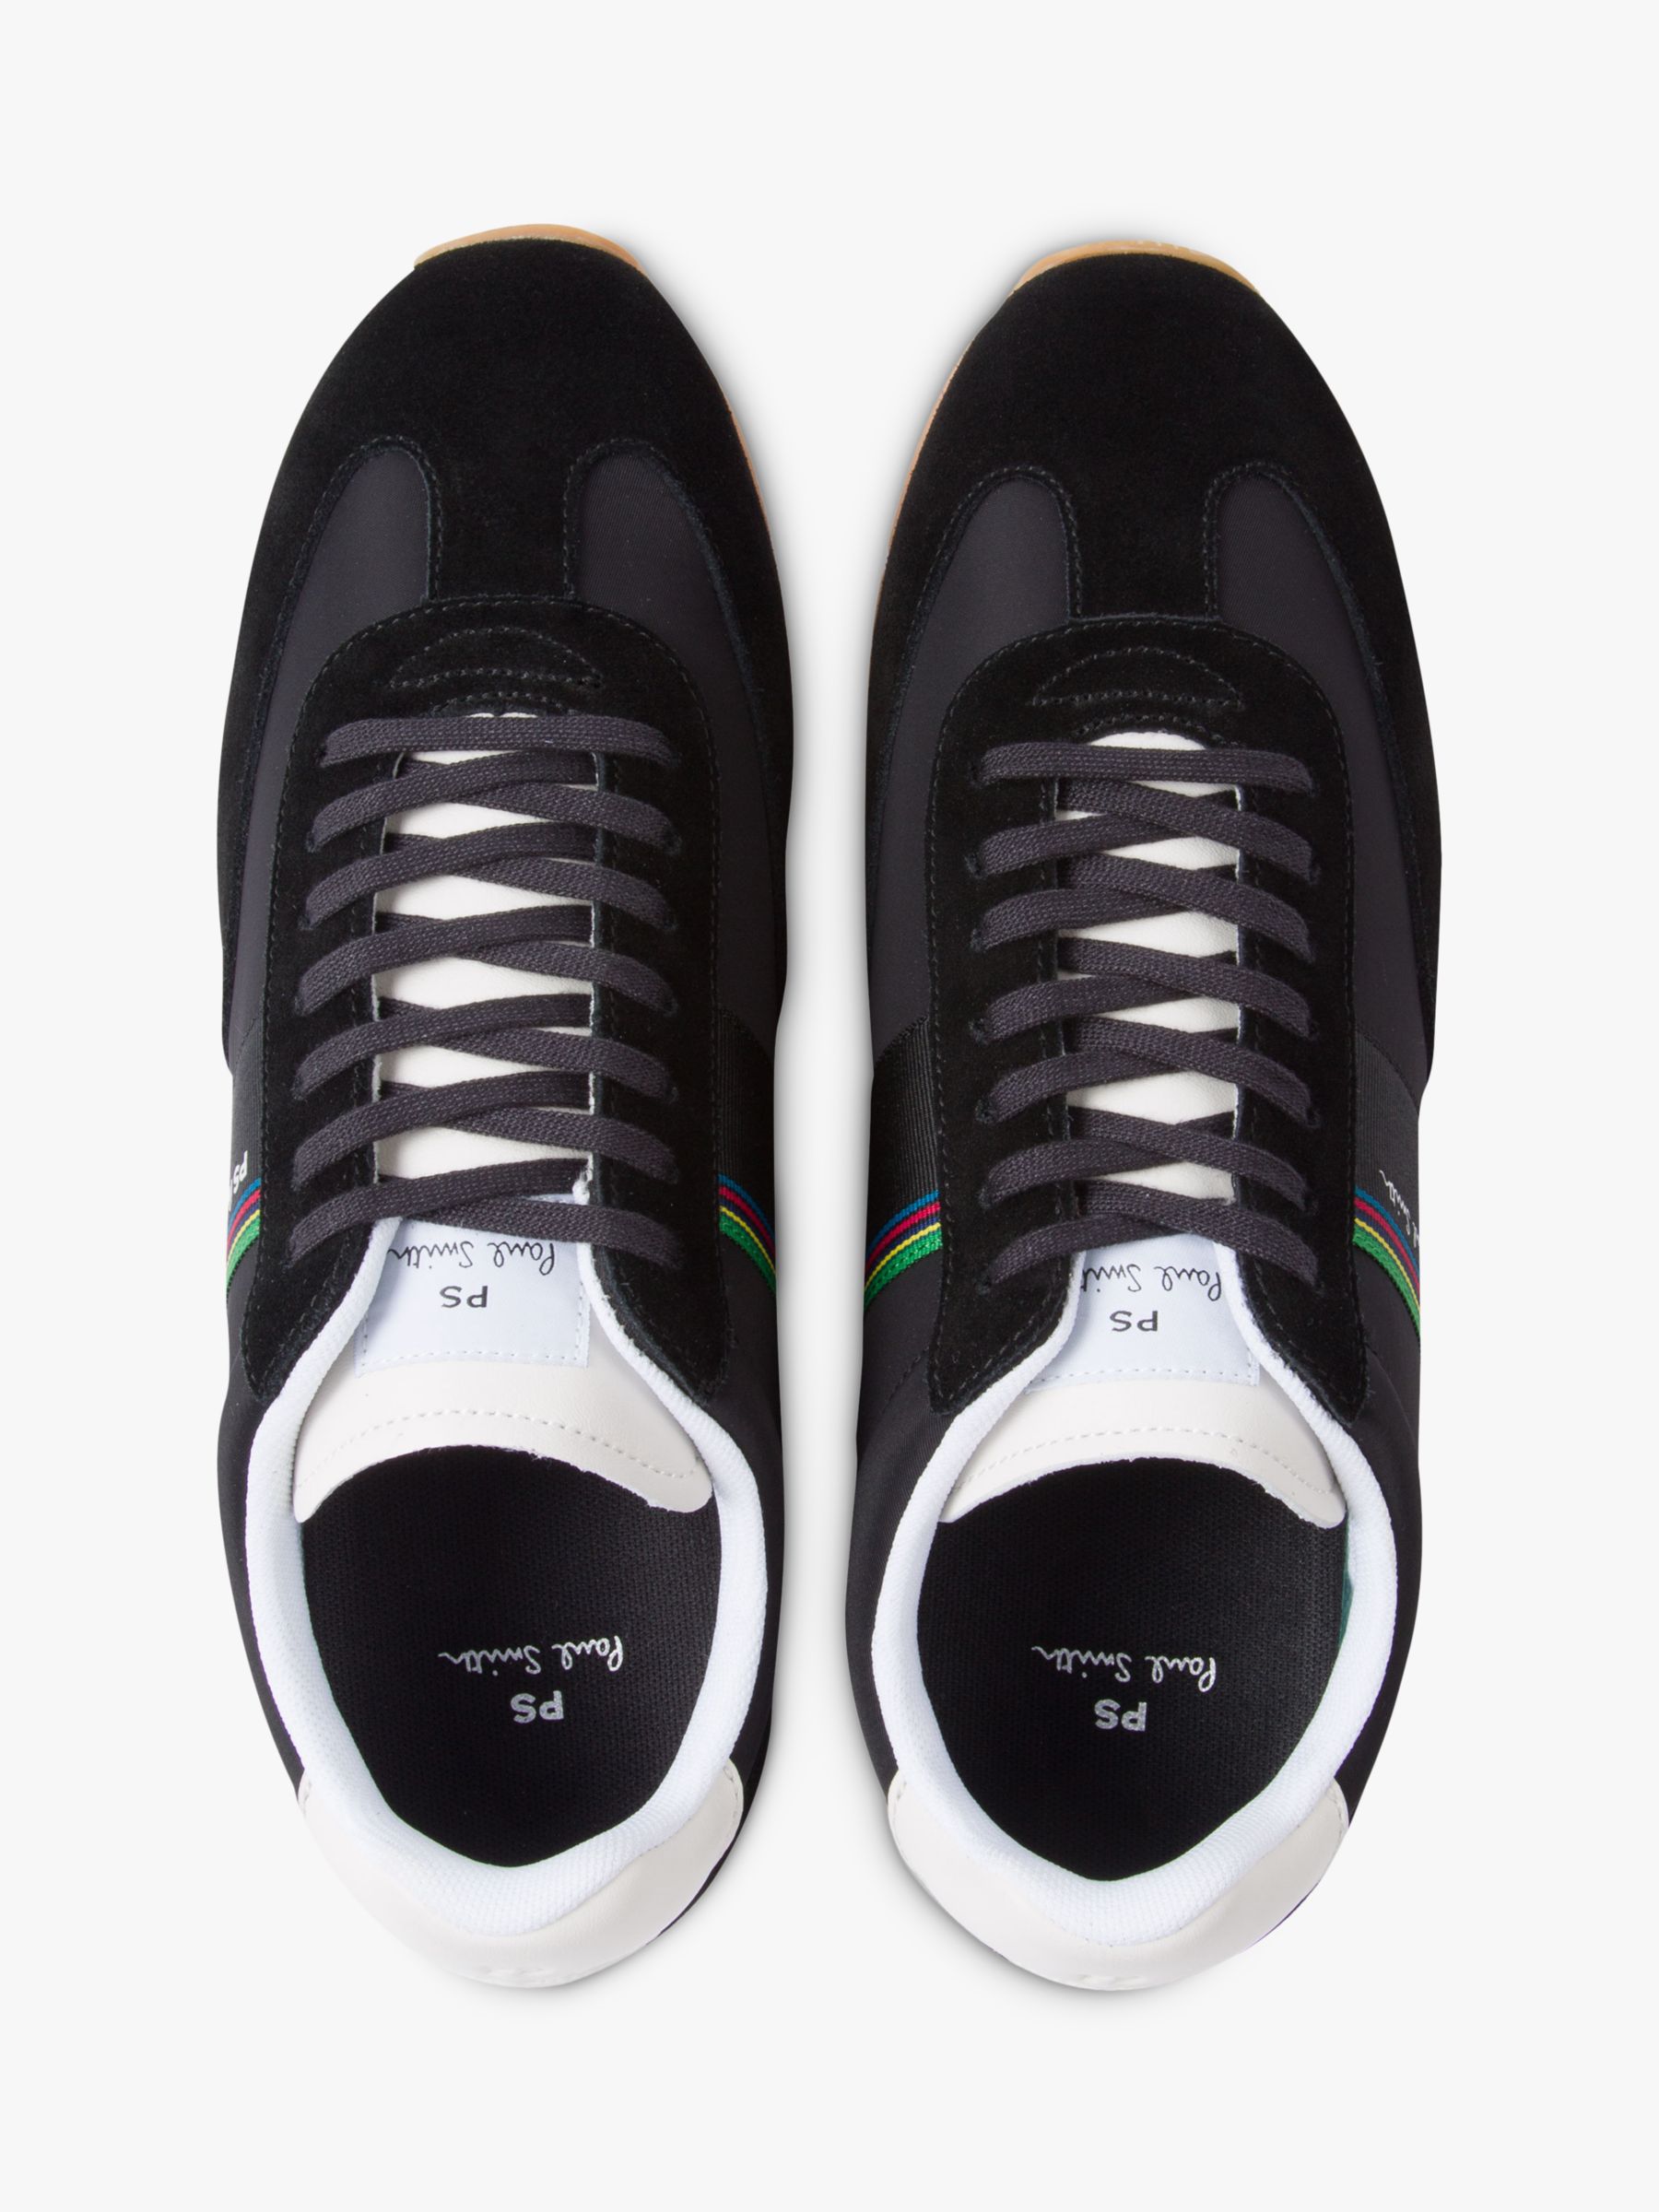 PS Paul Smith Prince Trainers, Black